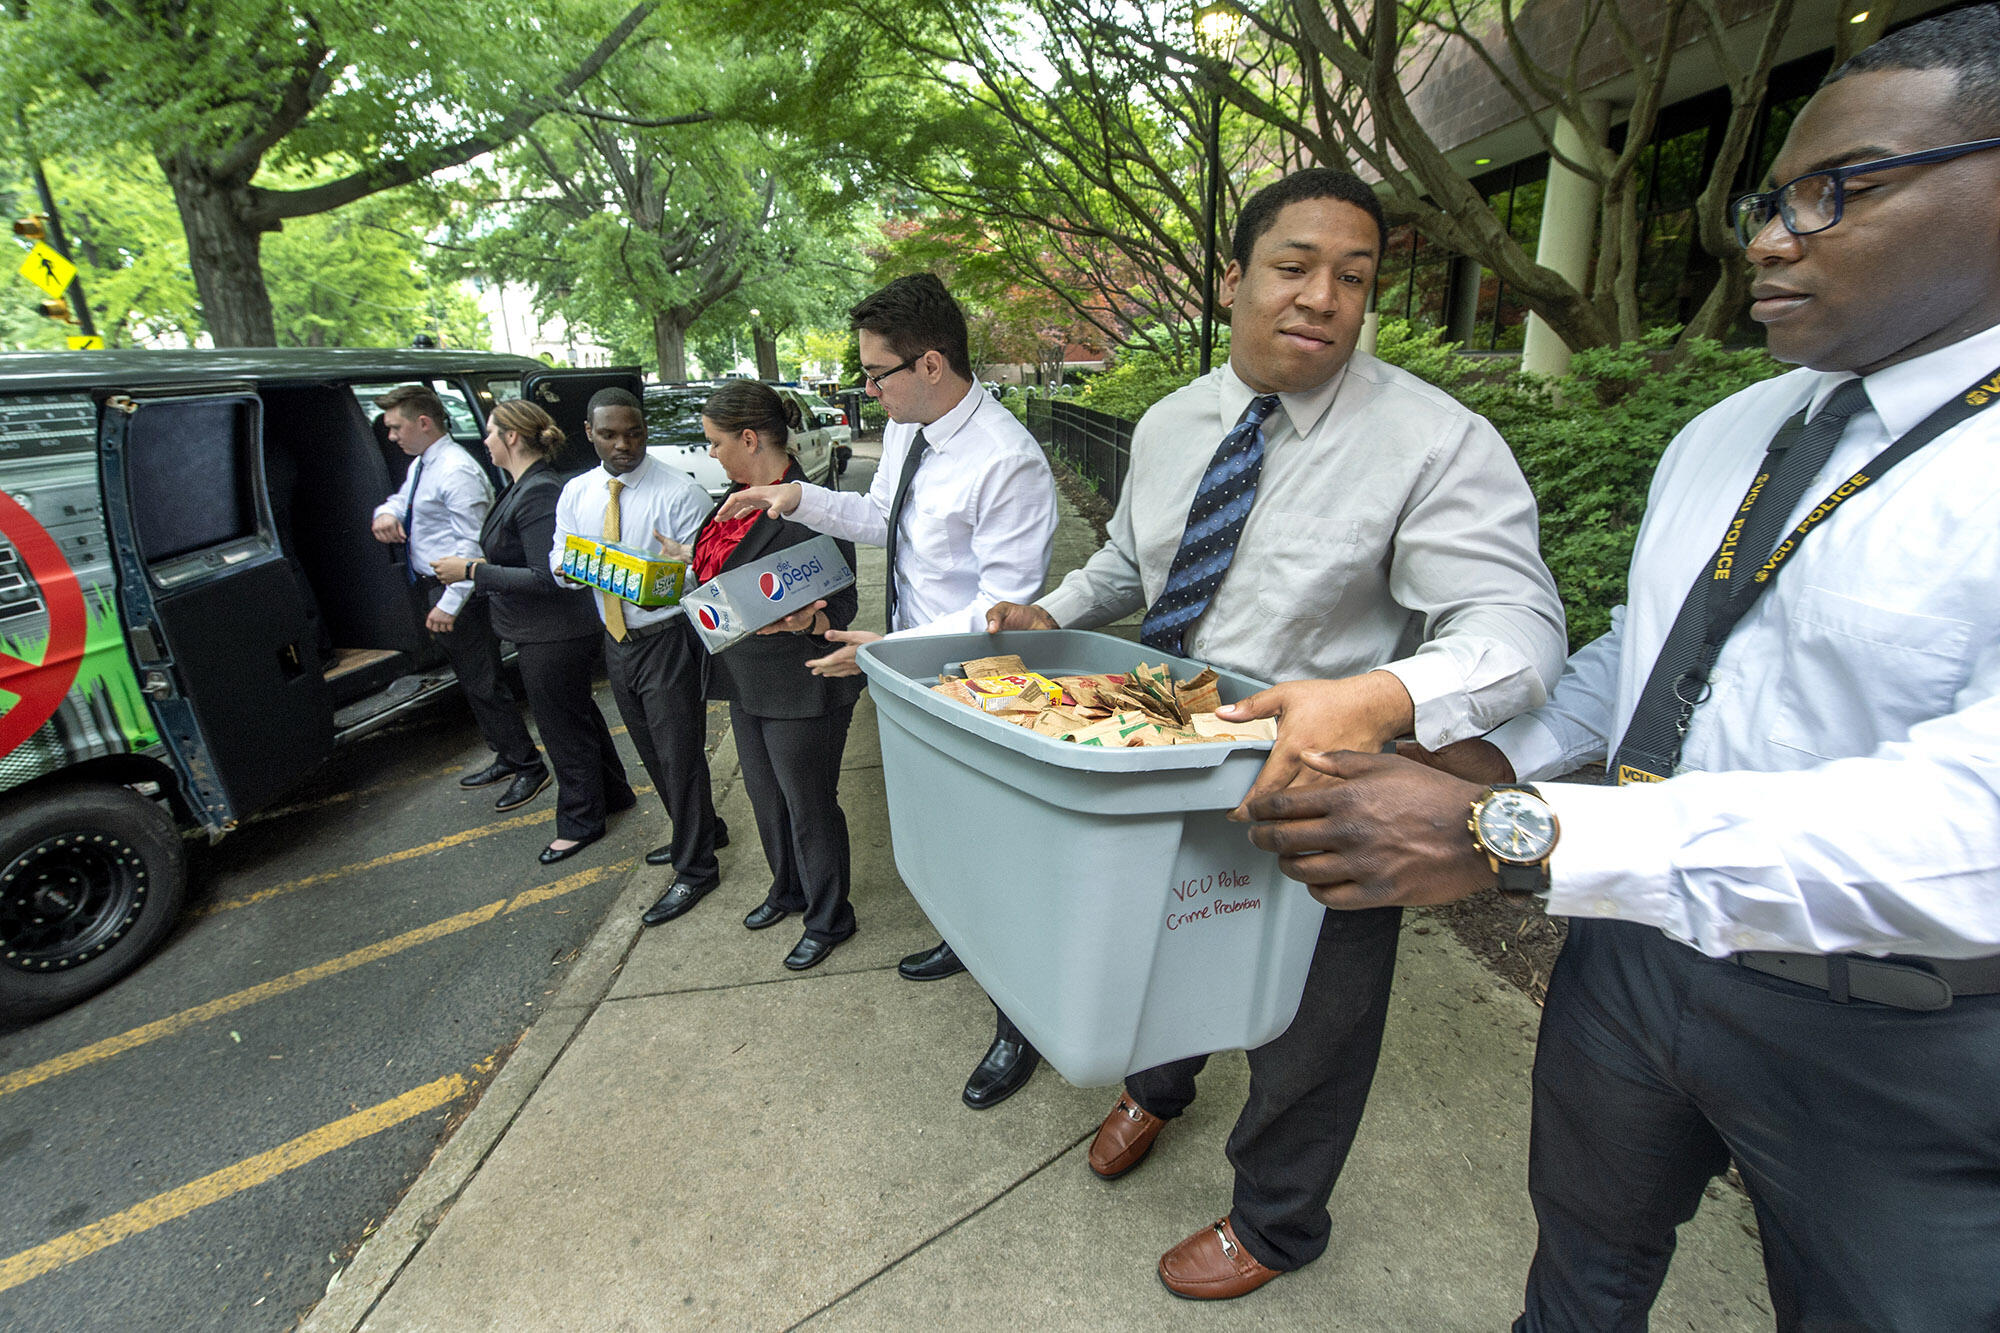 A line of people in business attire hand down packages and bins of food, starting at a van.